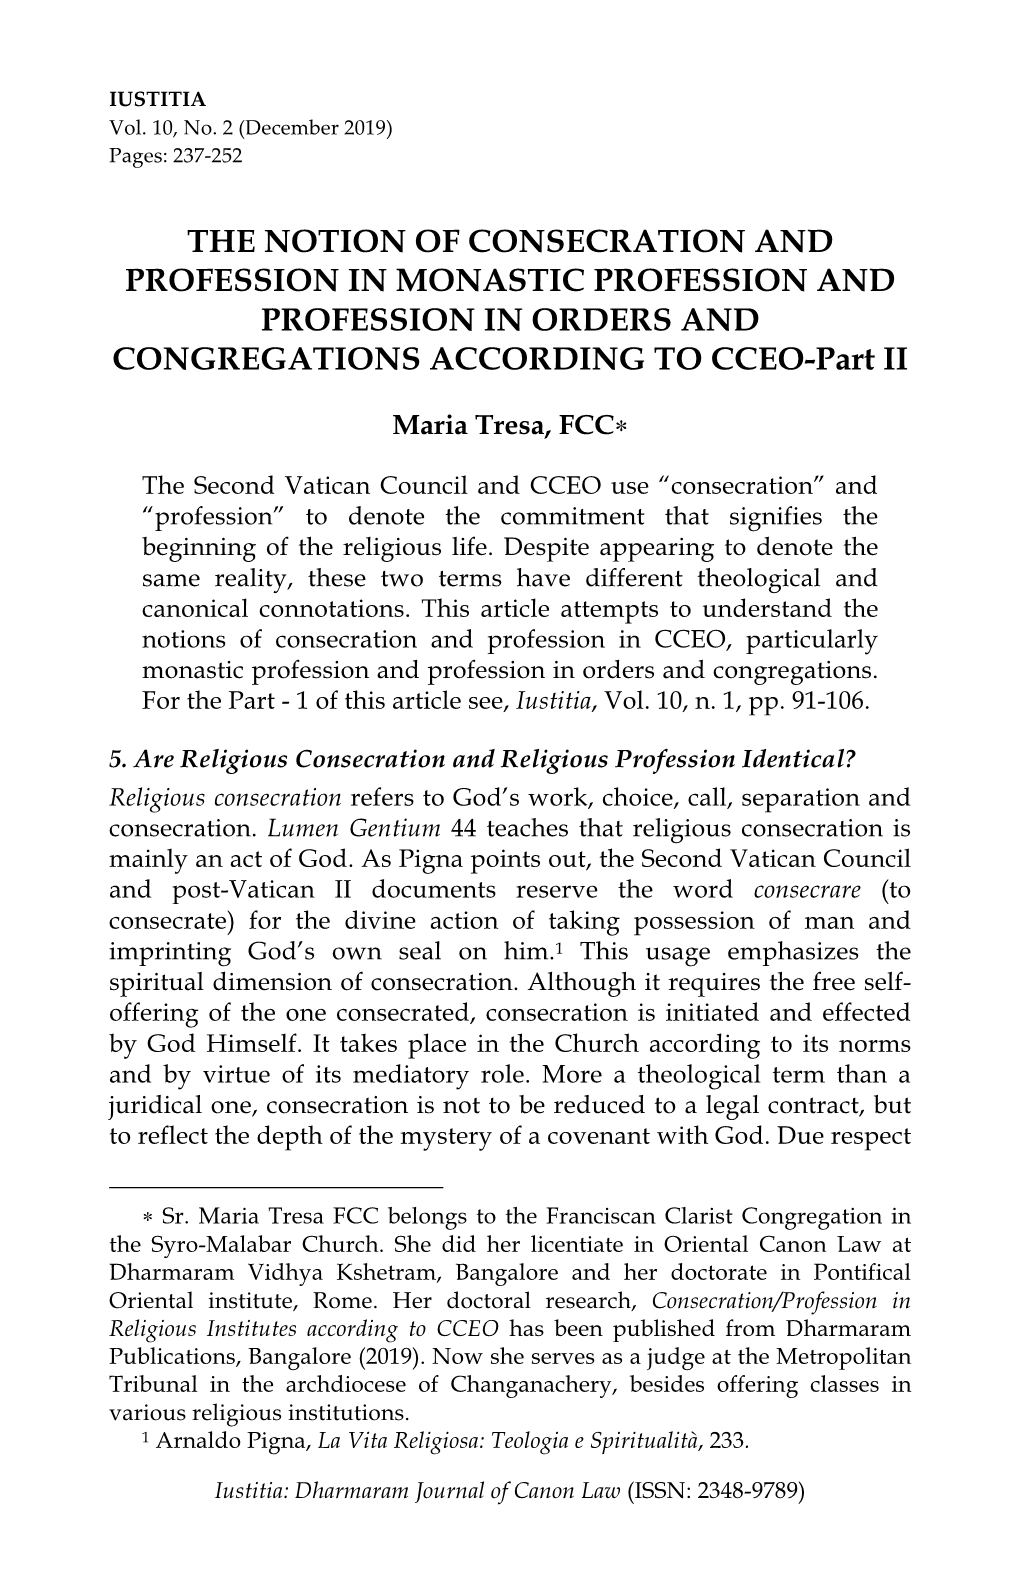 THE NOTION of CONSECRATION and PROFESSION in MONASTIC PROFESSION and PROFESSION in ORDERS and CONGREGATIONS ACCORDING to CCEO-Part II